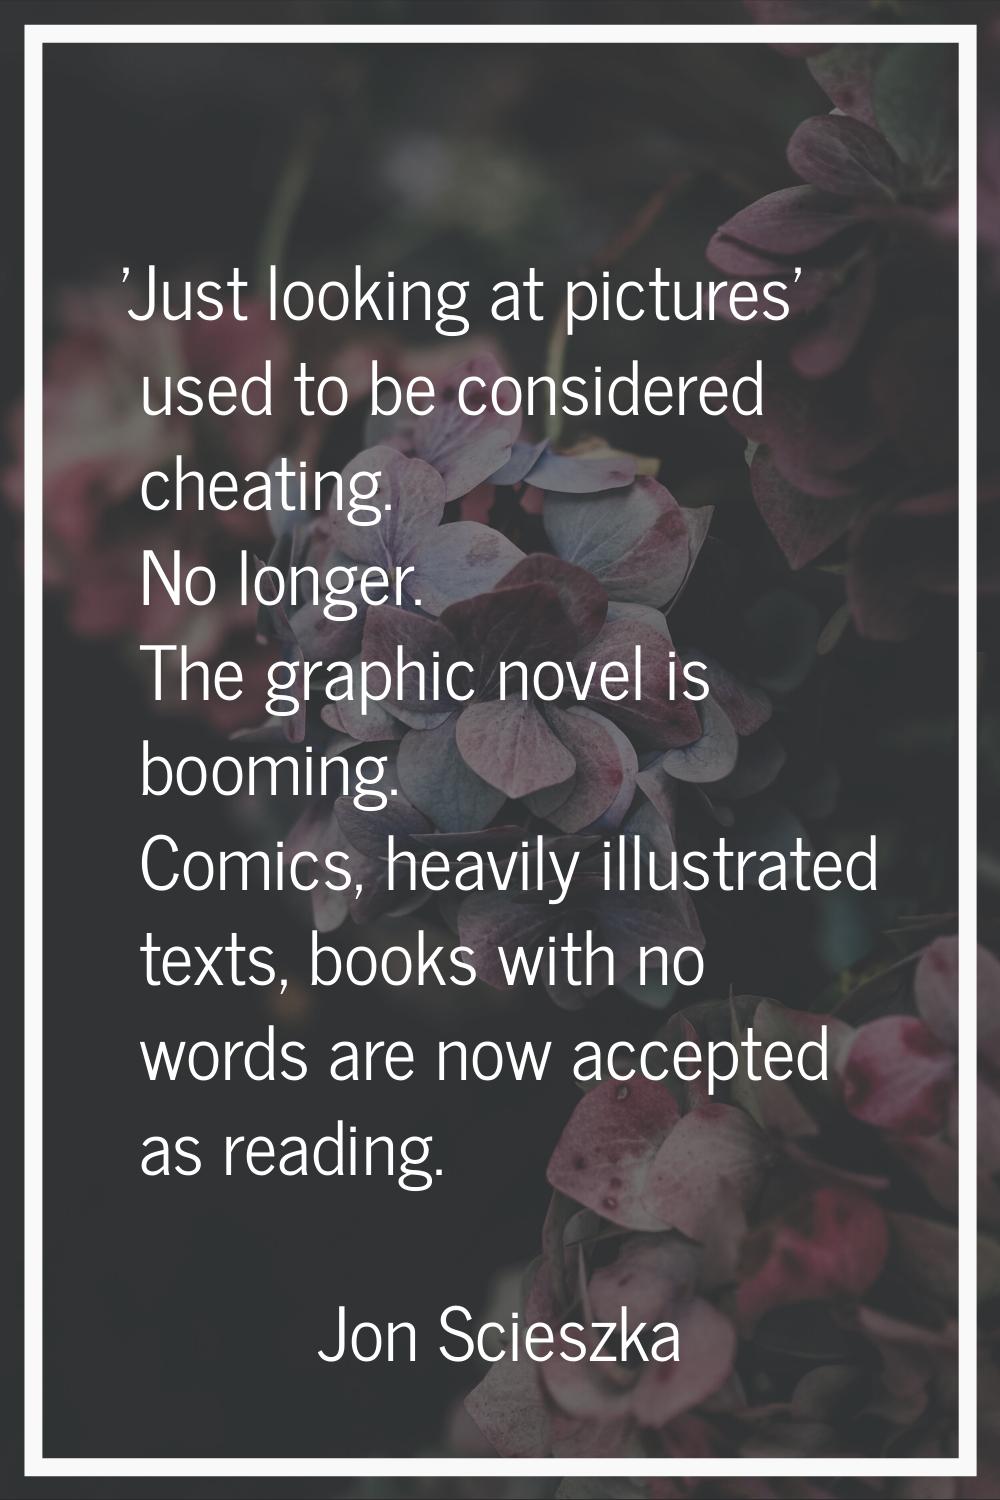 'Just looking at pictures' used to be considered cheating. No longer. The graphic novel is booming.